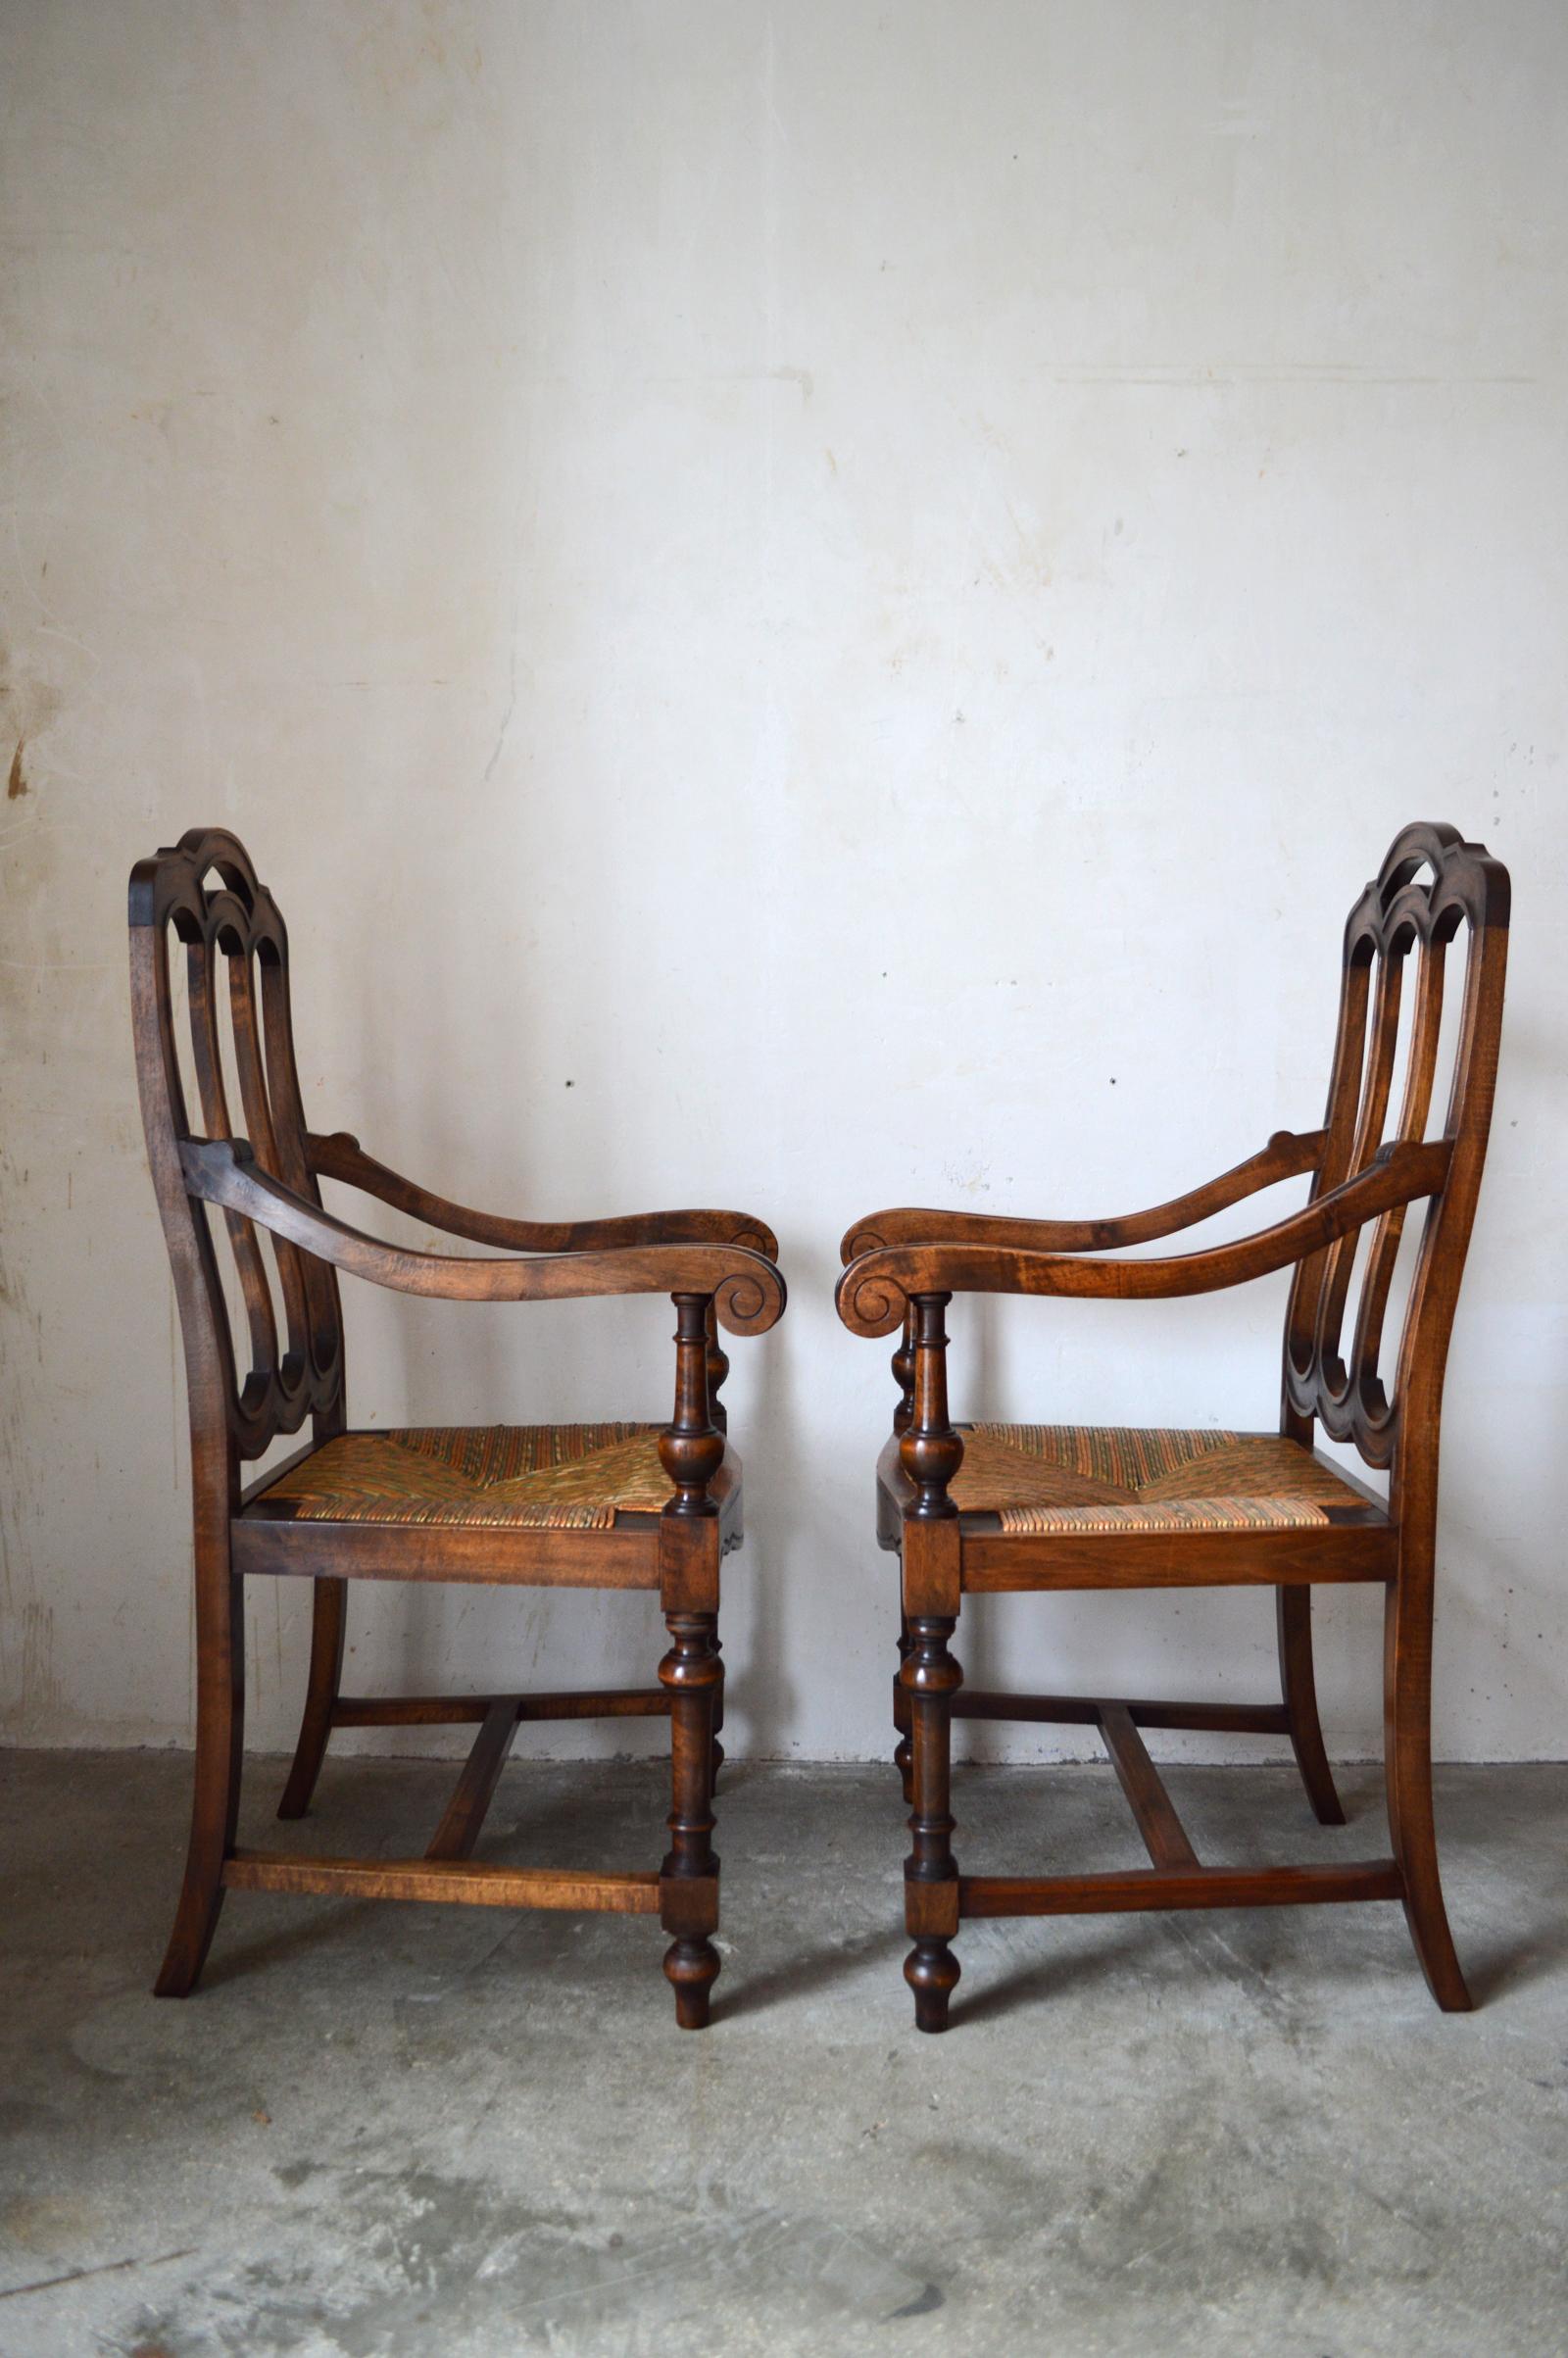 Superb pair of armchairs in walnut.

French Gothic Revival, circa 1890.

Wonderful condition.

Dimensions:
Depth 58 cm
Width 63 cm
Height 113 cm
Seat height 45 cm.